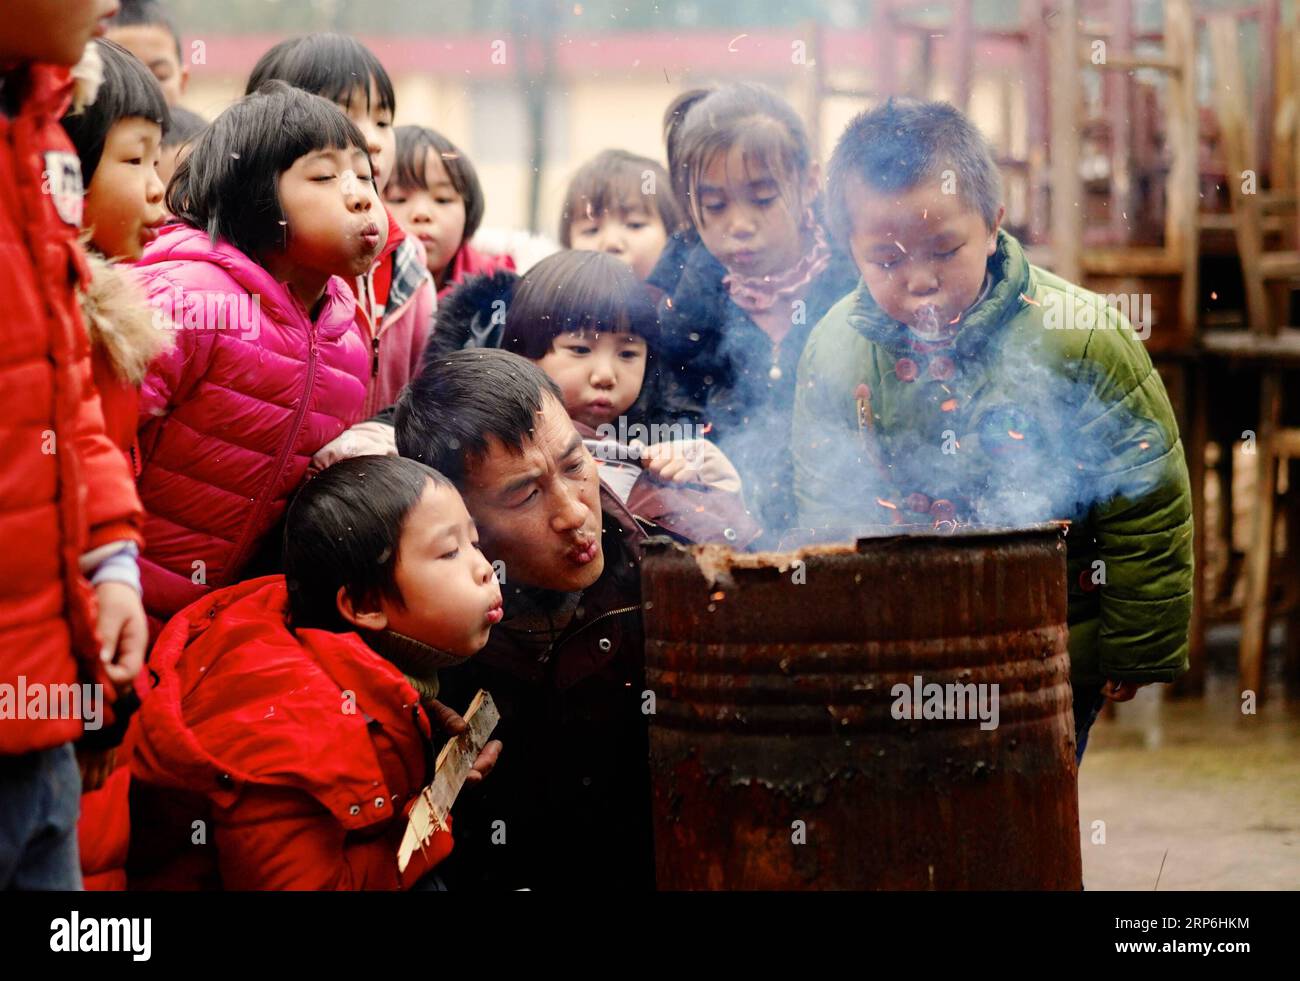 (190114) -- NANCHANG, Jan. 14, 2019 (Xinhua) -- Principal Zhang Zhanliang and students make fire to cook a meal at Huangni elementary school in Chuntao Town of Yujiang District of Yingtan City, east China s Jiangxi Province, Jan. 3, 2019. Zhang Zhanliang, the principal of Huangni primary school, has been known nationwide recently for taking care of the school s left-behind children, whose parents are migrant workers in towns and cities. For years, there s no canteen at Huangni elementary school. Appointed as principal in 2018, Zhang Zhanliang spent his own money cooking additional meal for the Stock Photo